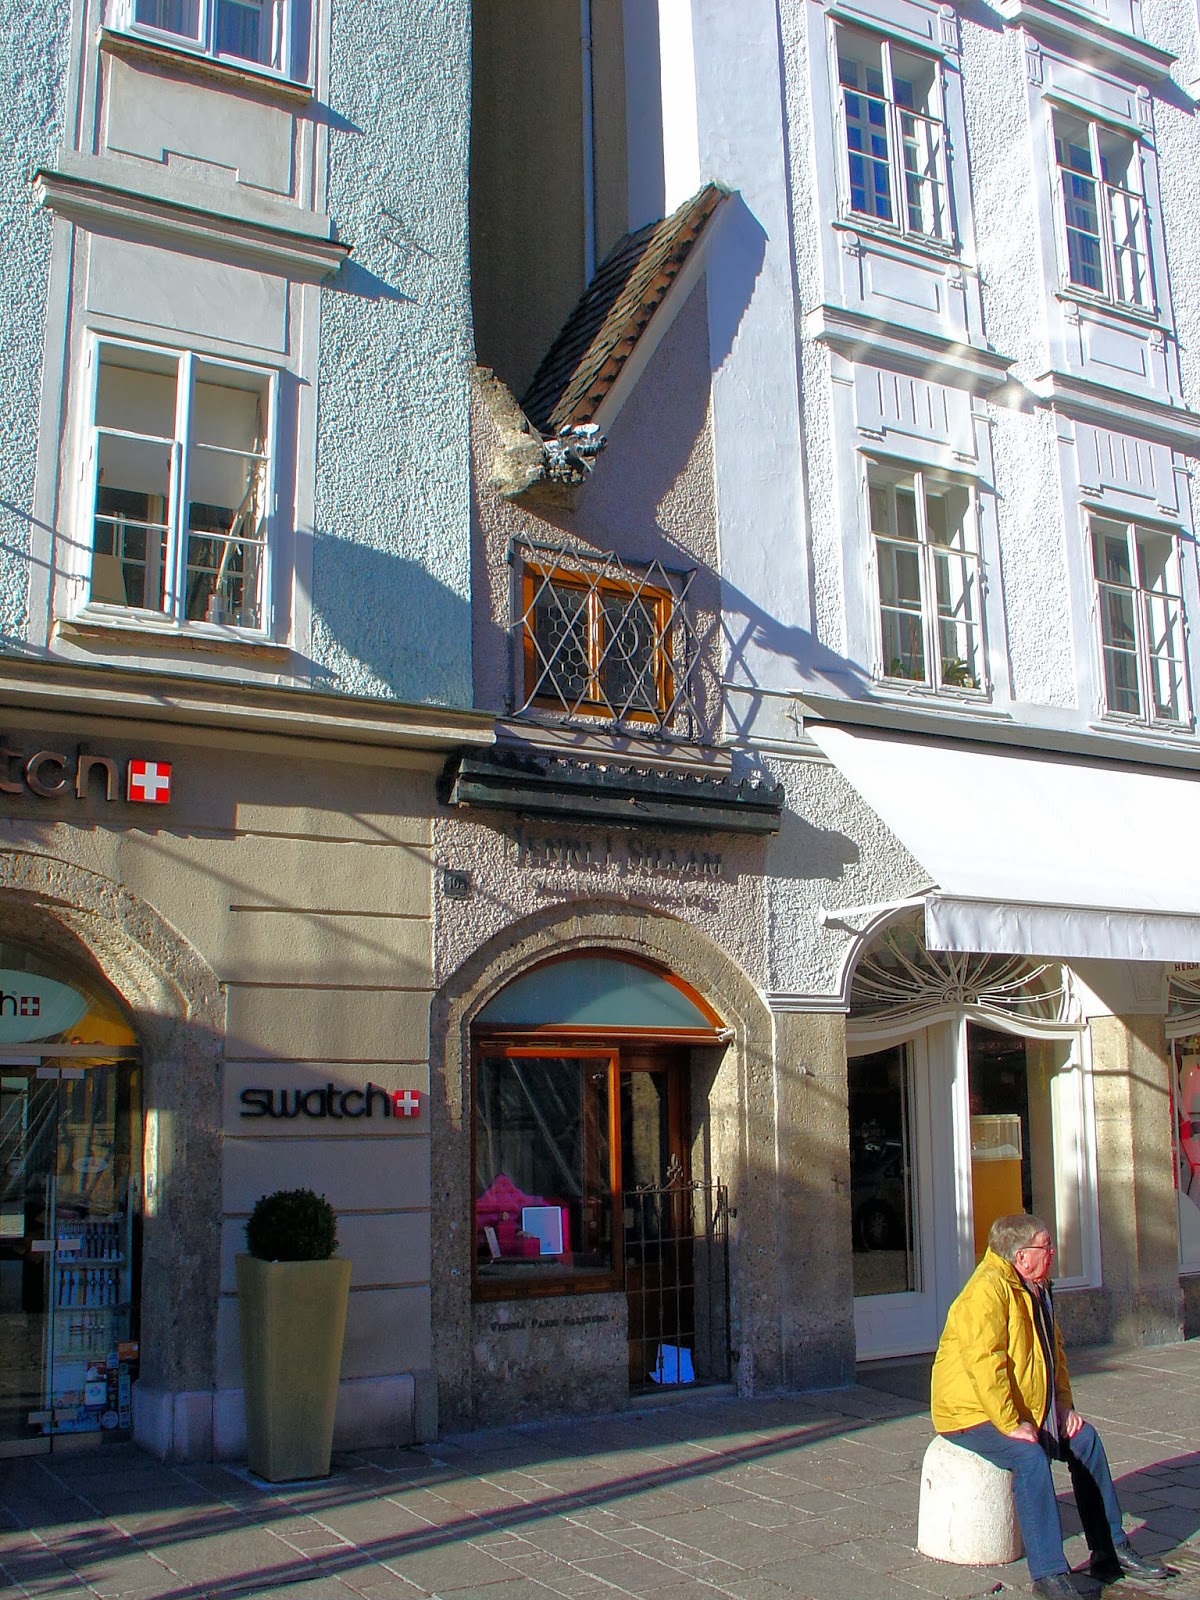 The smallest house in Salzburg can be found in the Alter Market or Old Market square tucked between the Domplatz and Getreidegasse shopping street also the location of Mozart's birthplace.